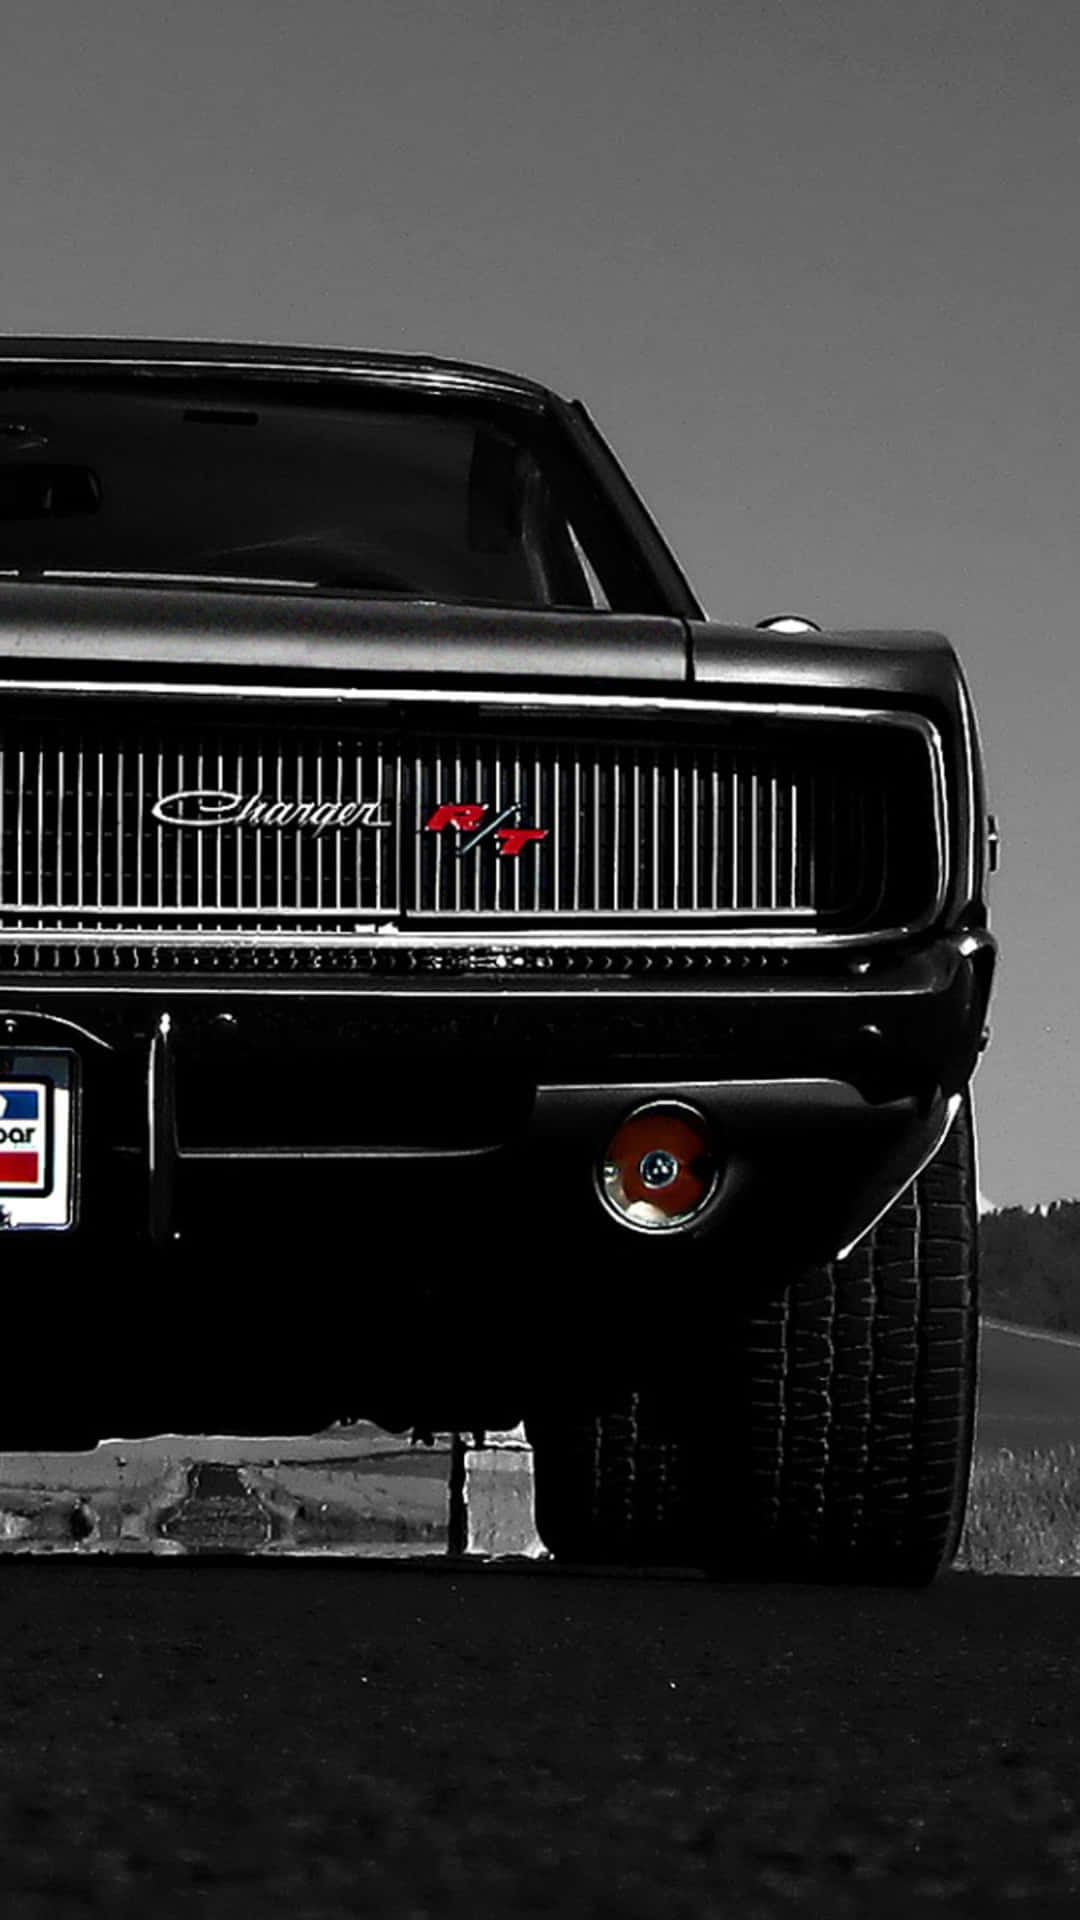 Classic Charger Car Iphone Wallpaper